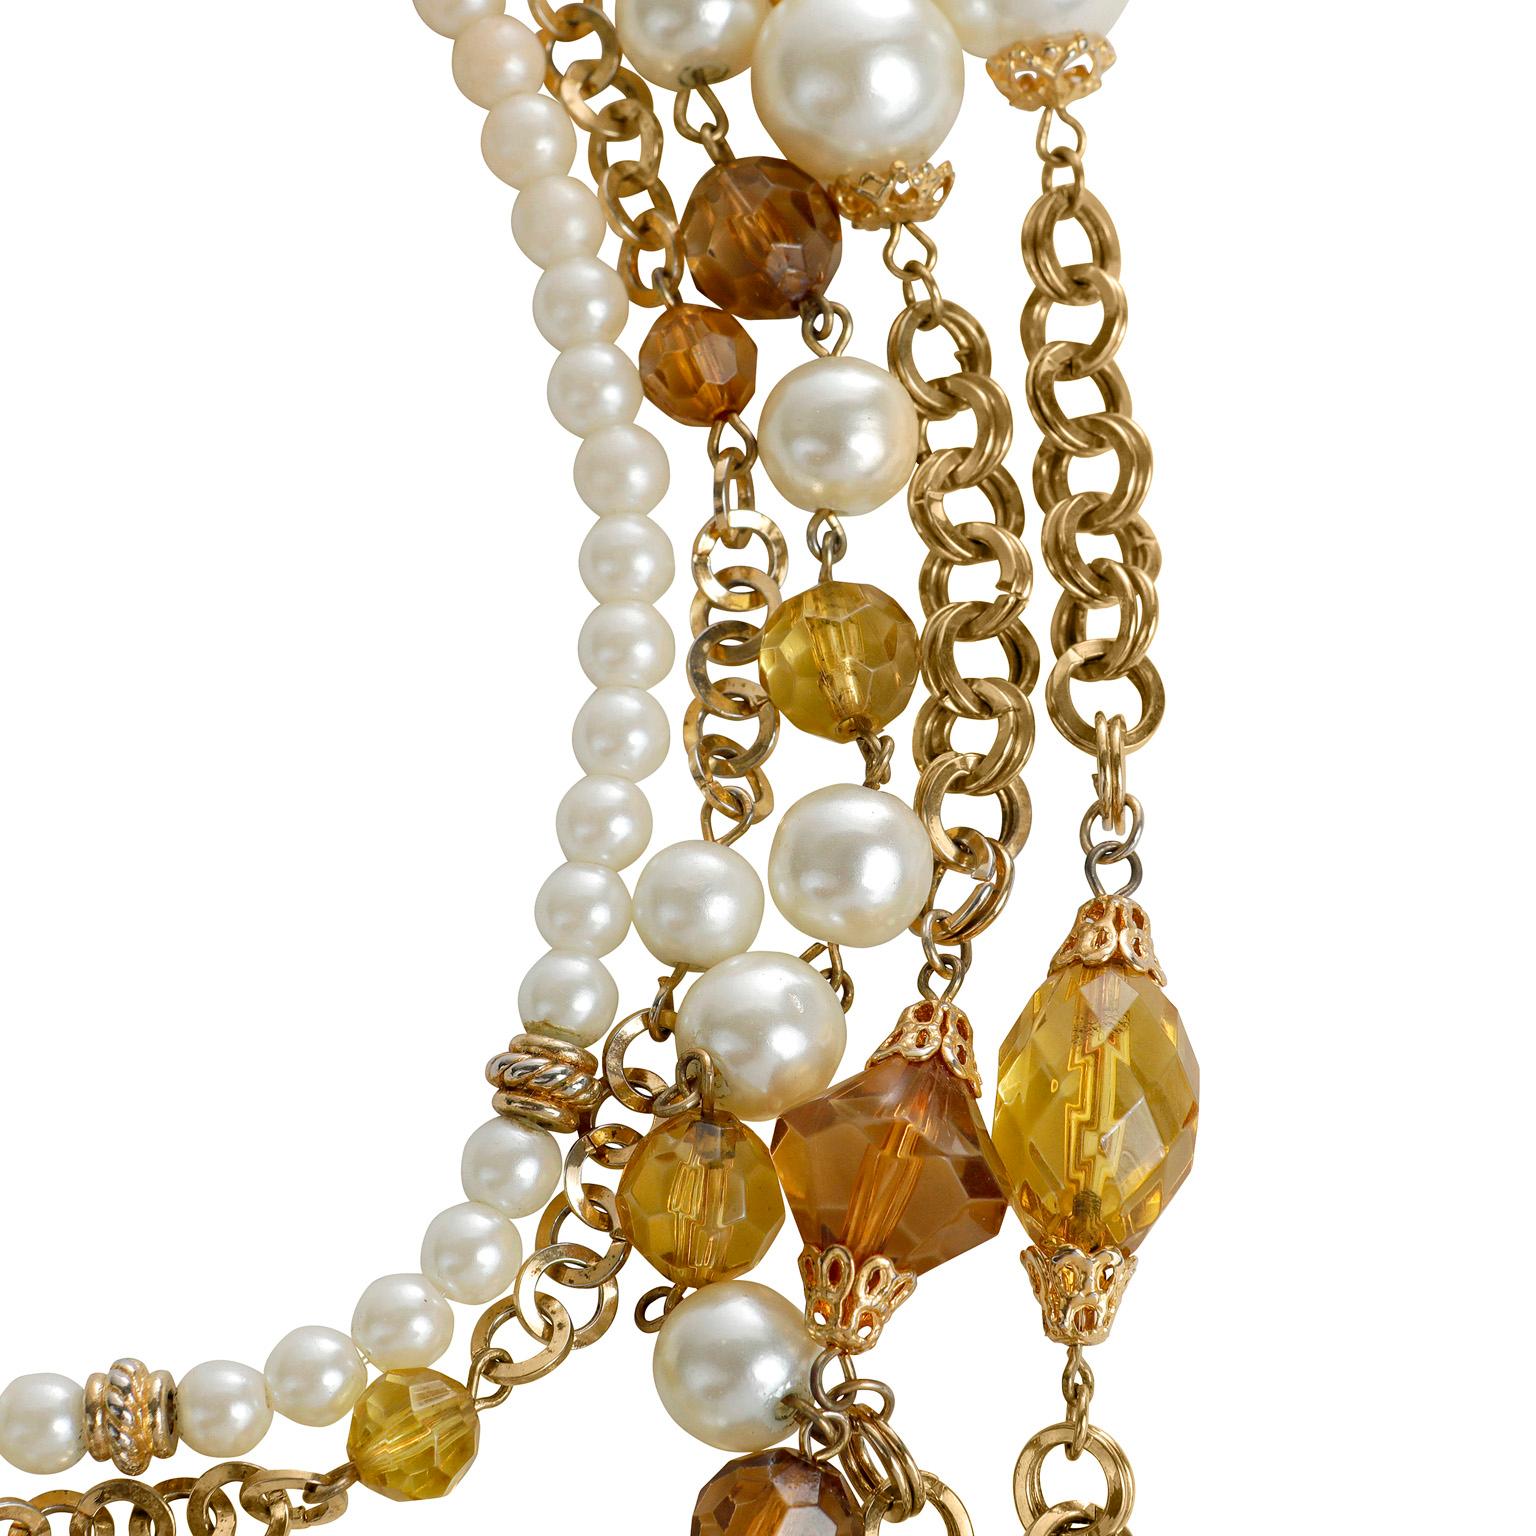 This authentic Chanel Pearl and Amber Crystal Layered Bib Necklace is in excellent vintage condition.  Five strands of varied gold chain, amber crystal beads and faux pearls are layered together in this stunning collectible piece.  Anchored all